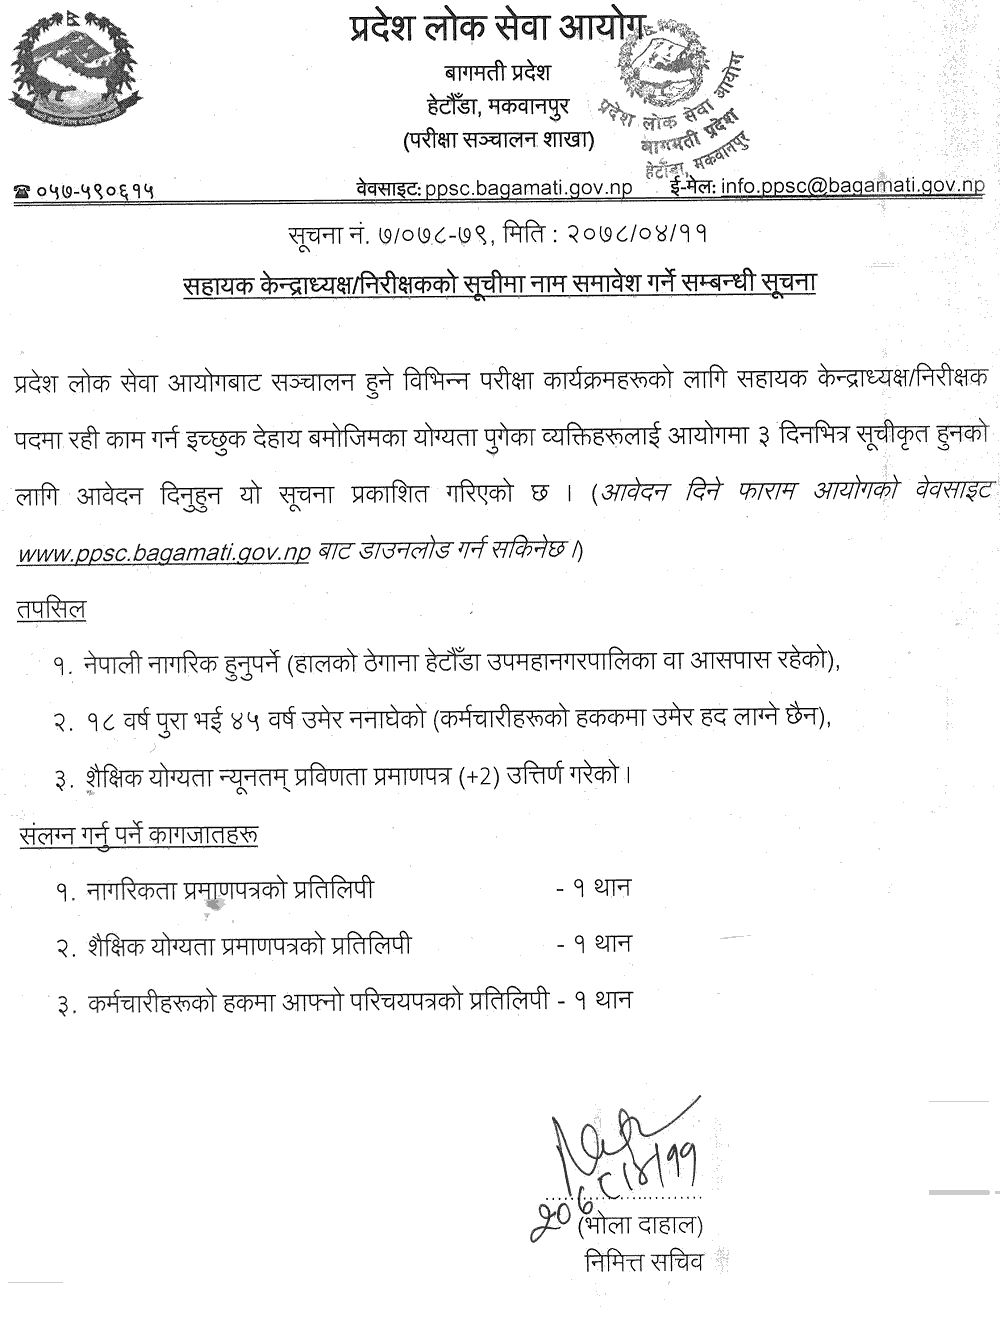 Bagmati Pradesh Lok Sewa Aayog Call to Apply for Assistant Central Chairperson  Inspector